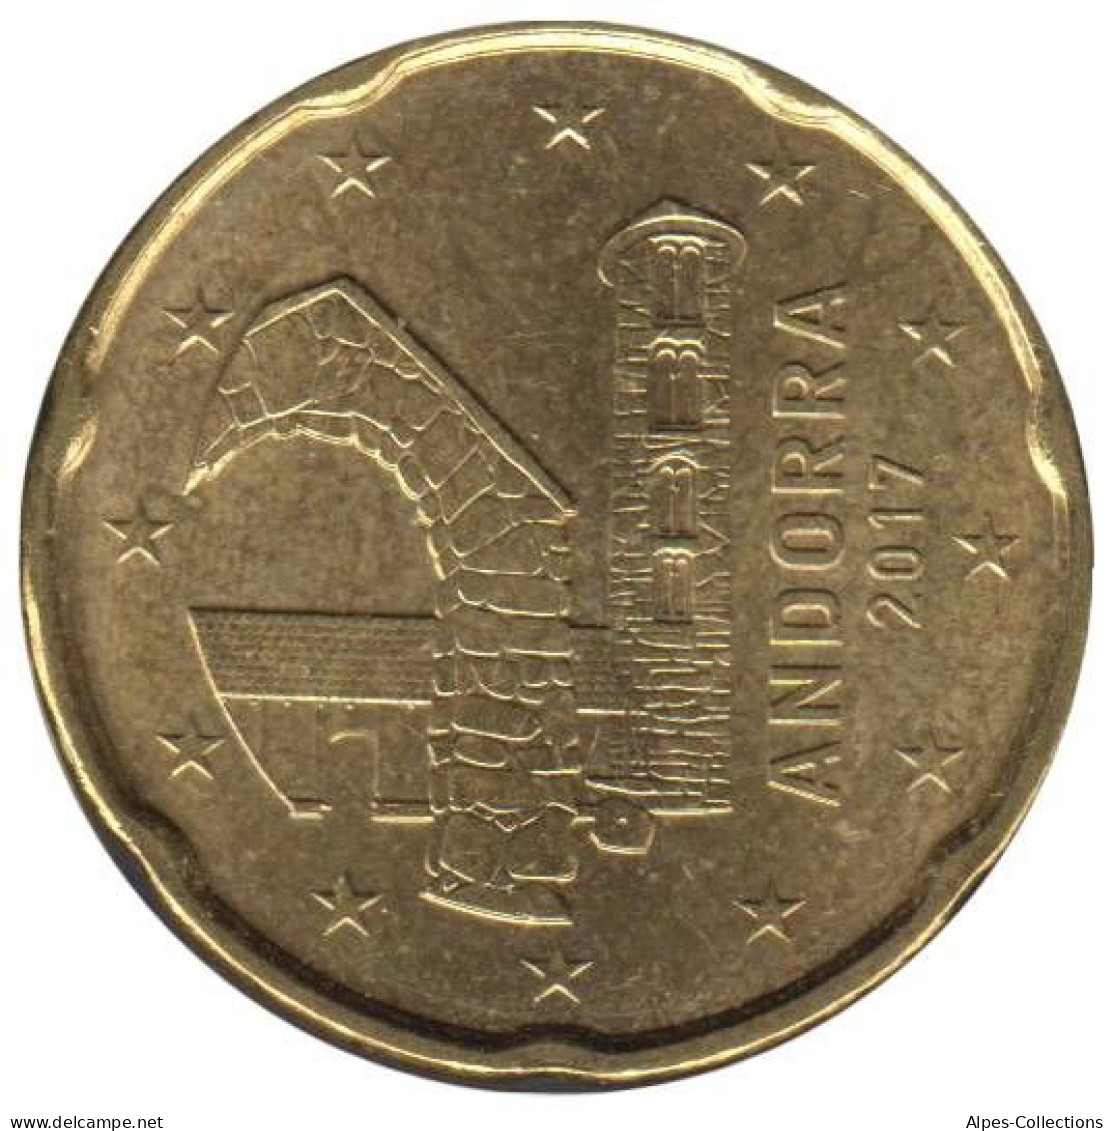 AN02014.1 - ANDORRE - 20 Cents D'euro - 2014 - Andorre